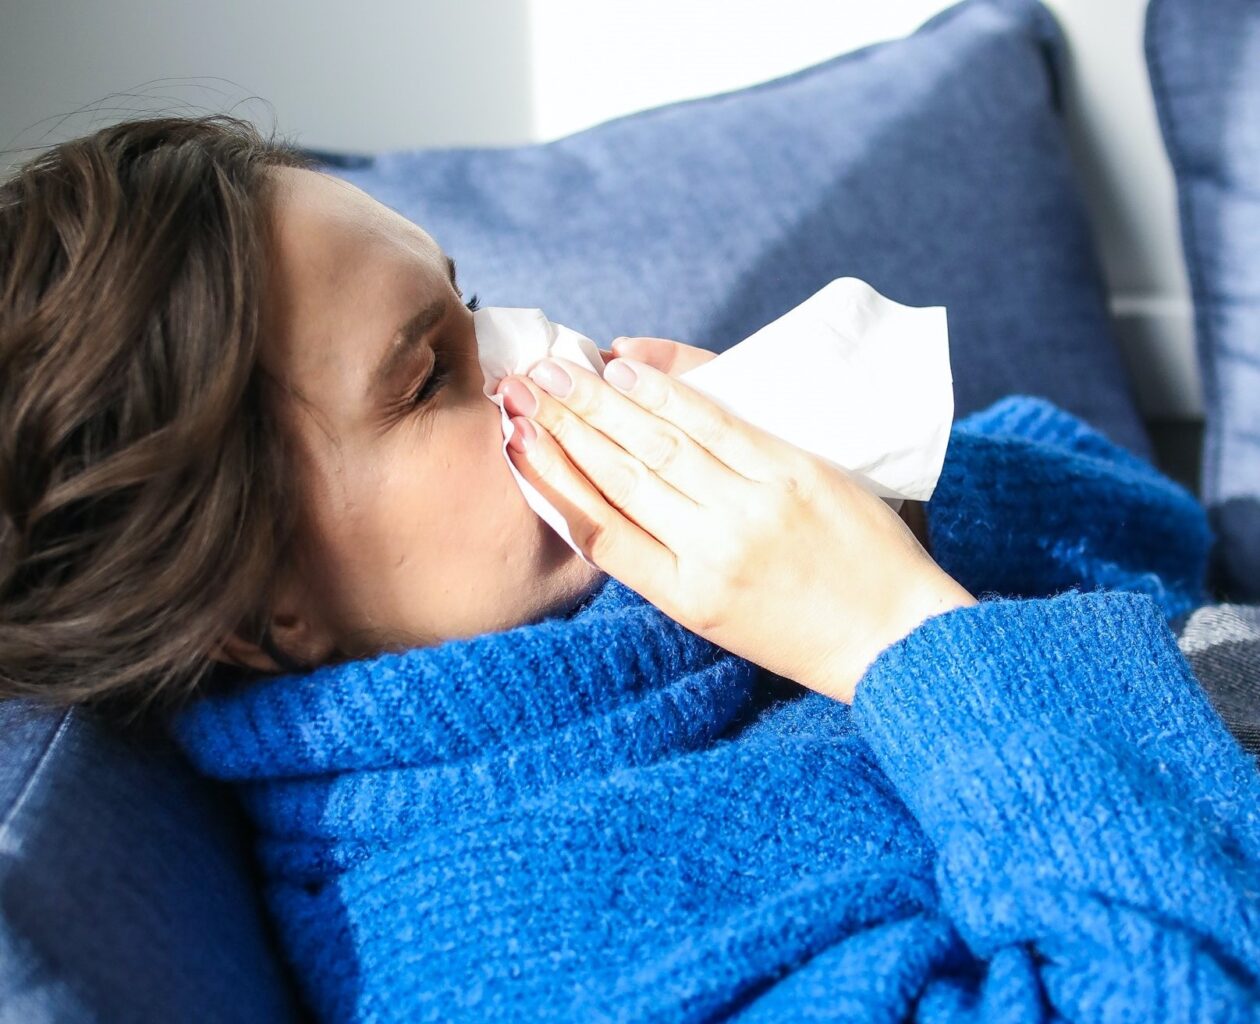 Tis the season for colds and flus. Keep your furnishings from harboring bacteria.